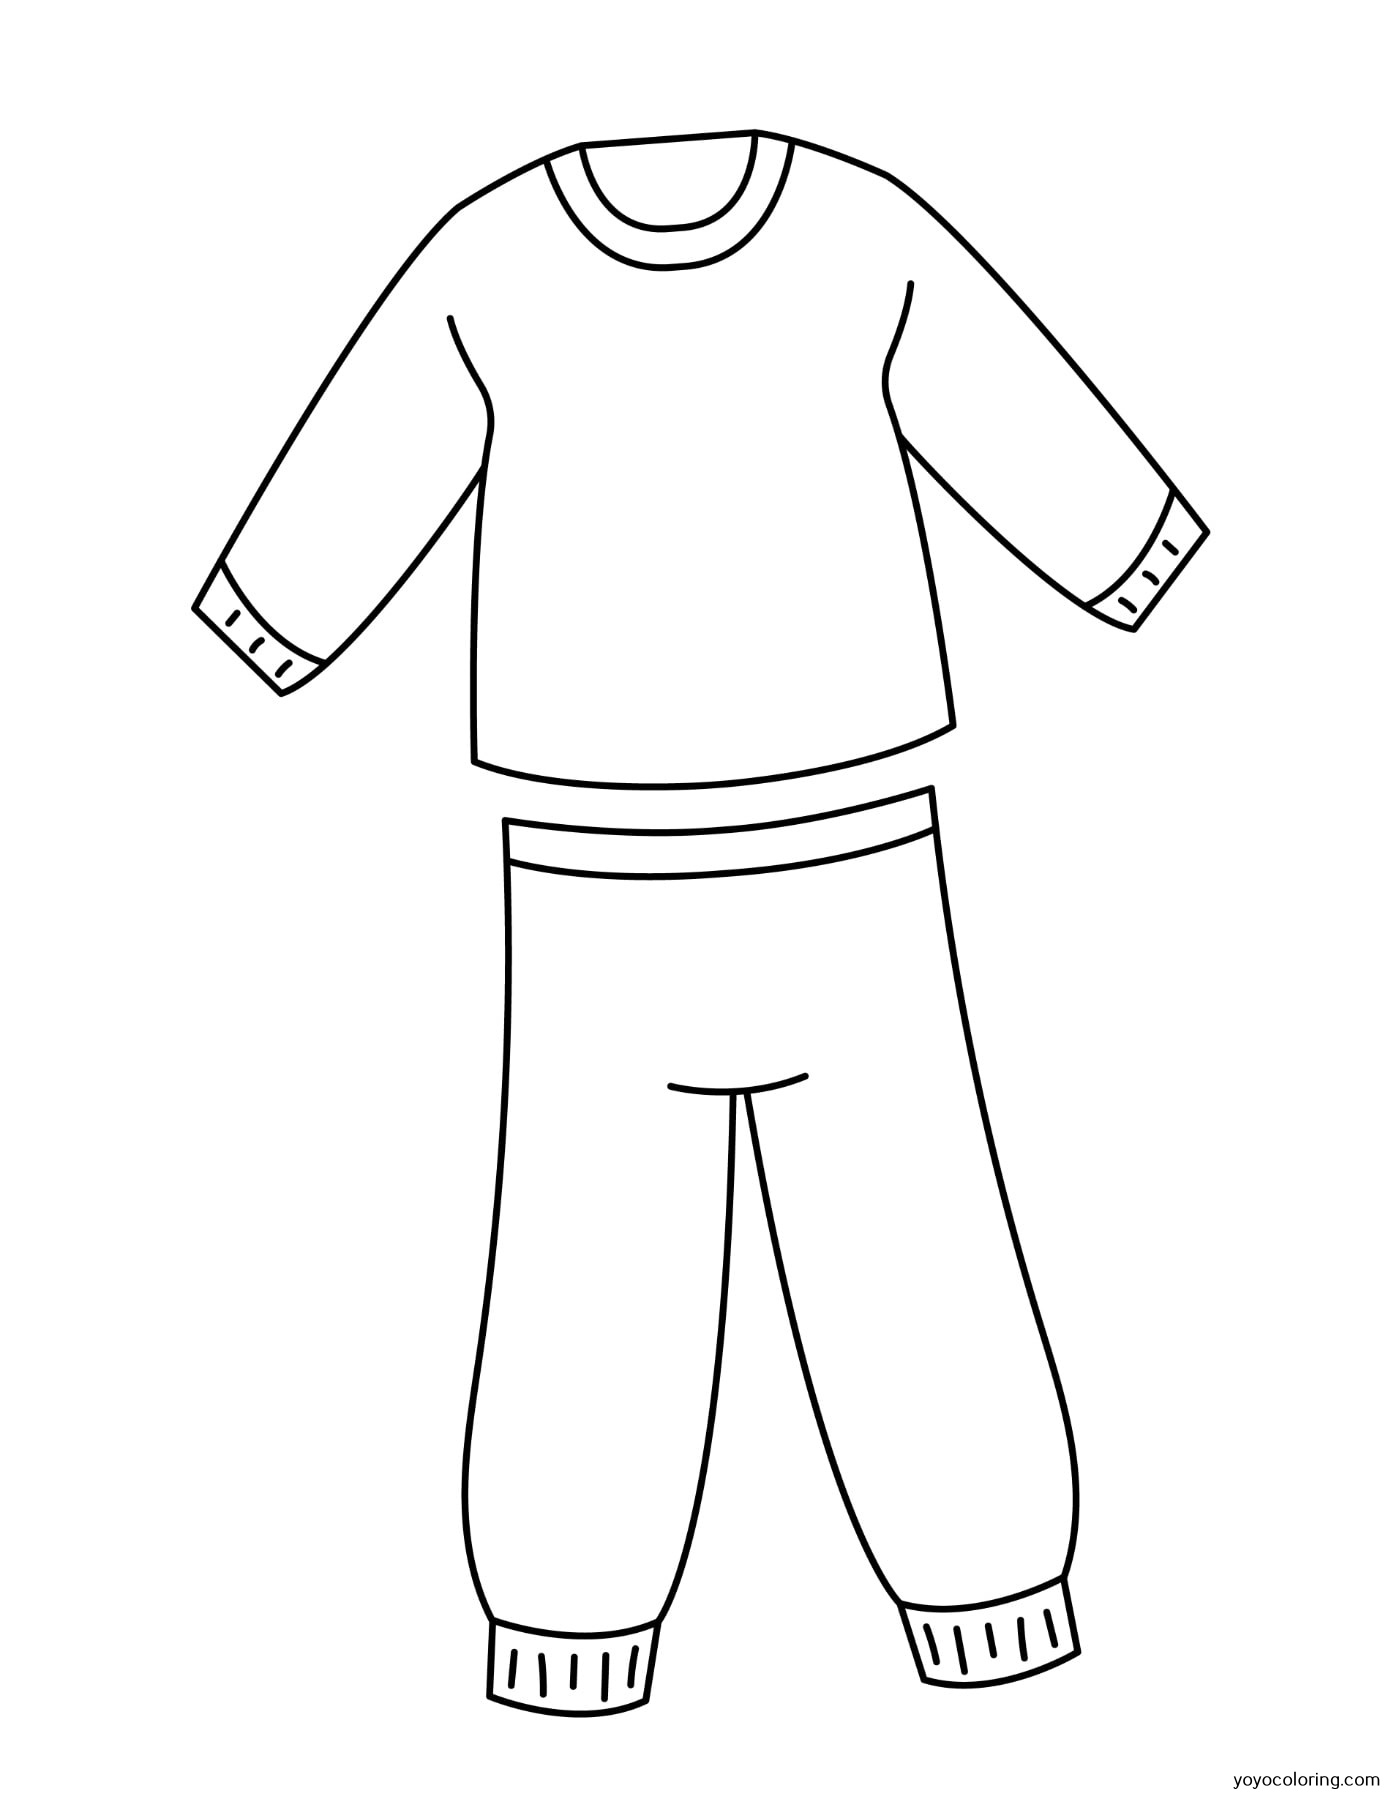 Pajamas Coloring Pages ᗎ Printable Painting Template